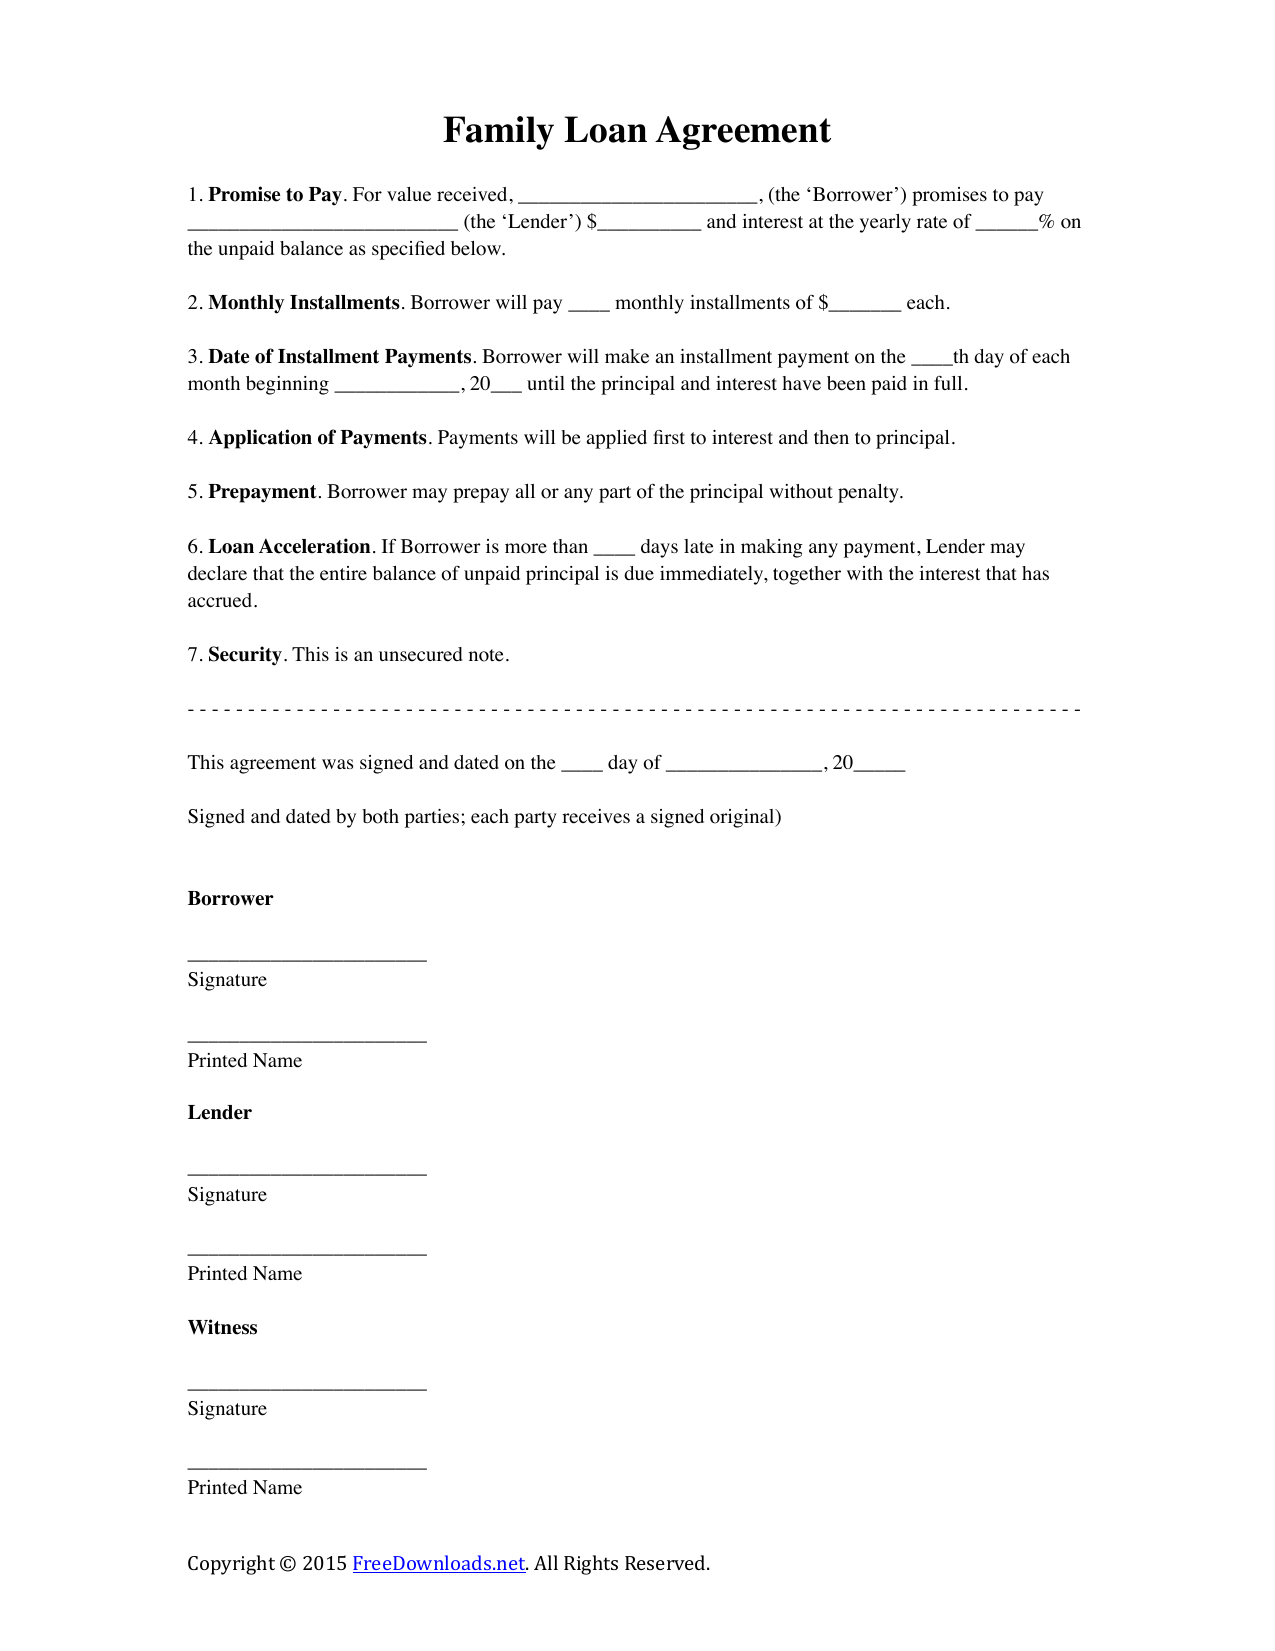 Download Family Loan Agreement Template  PDF  RTF  Word With Regard To family loan agreement template free